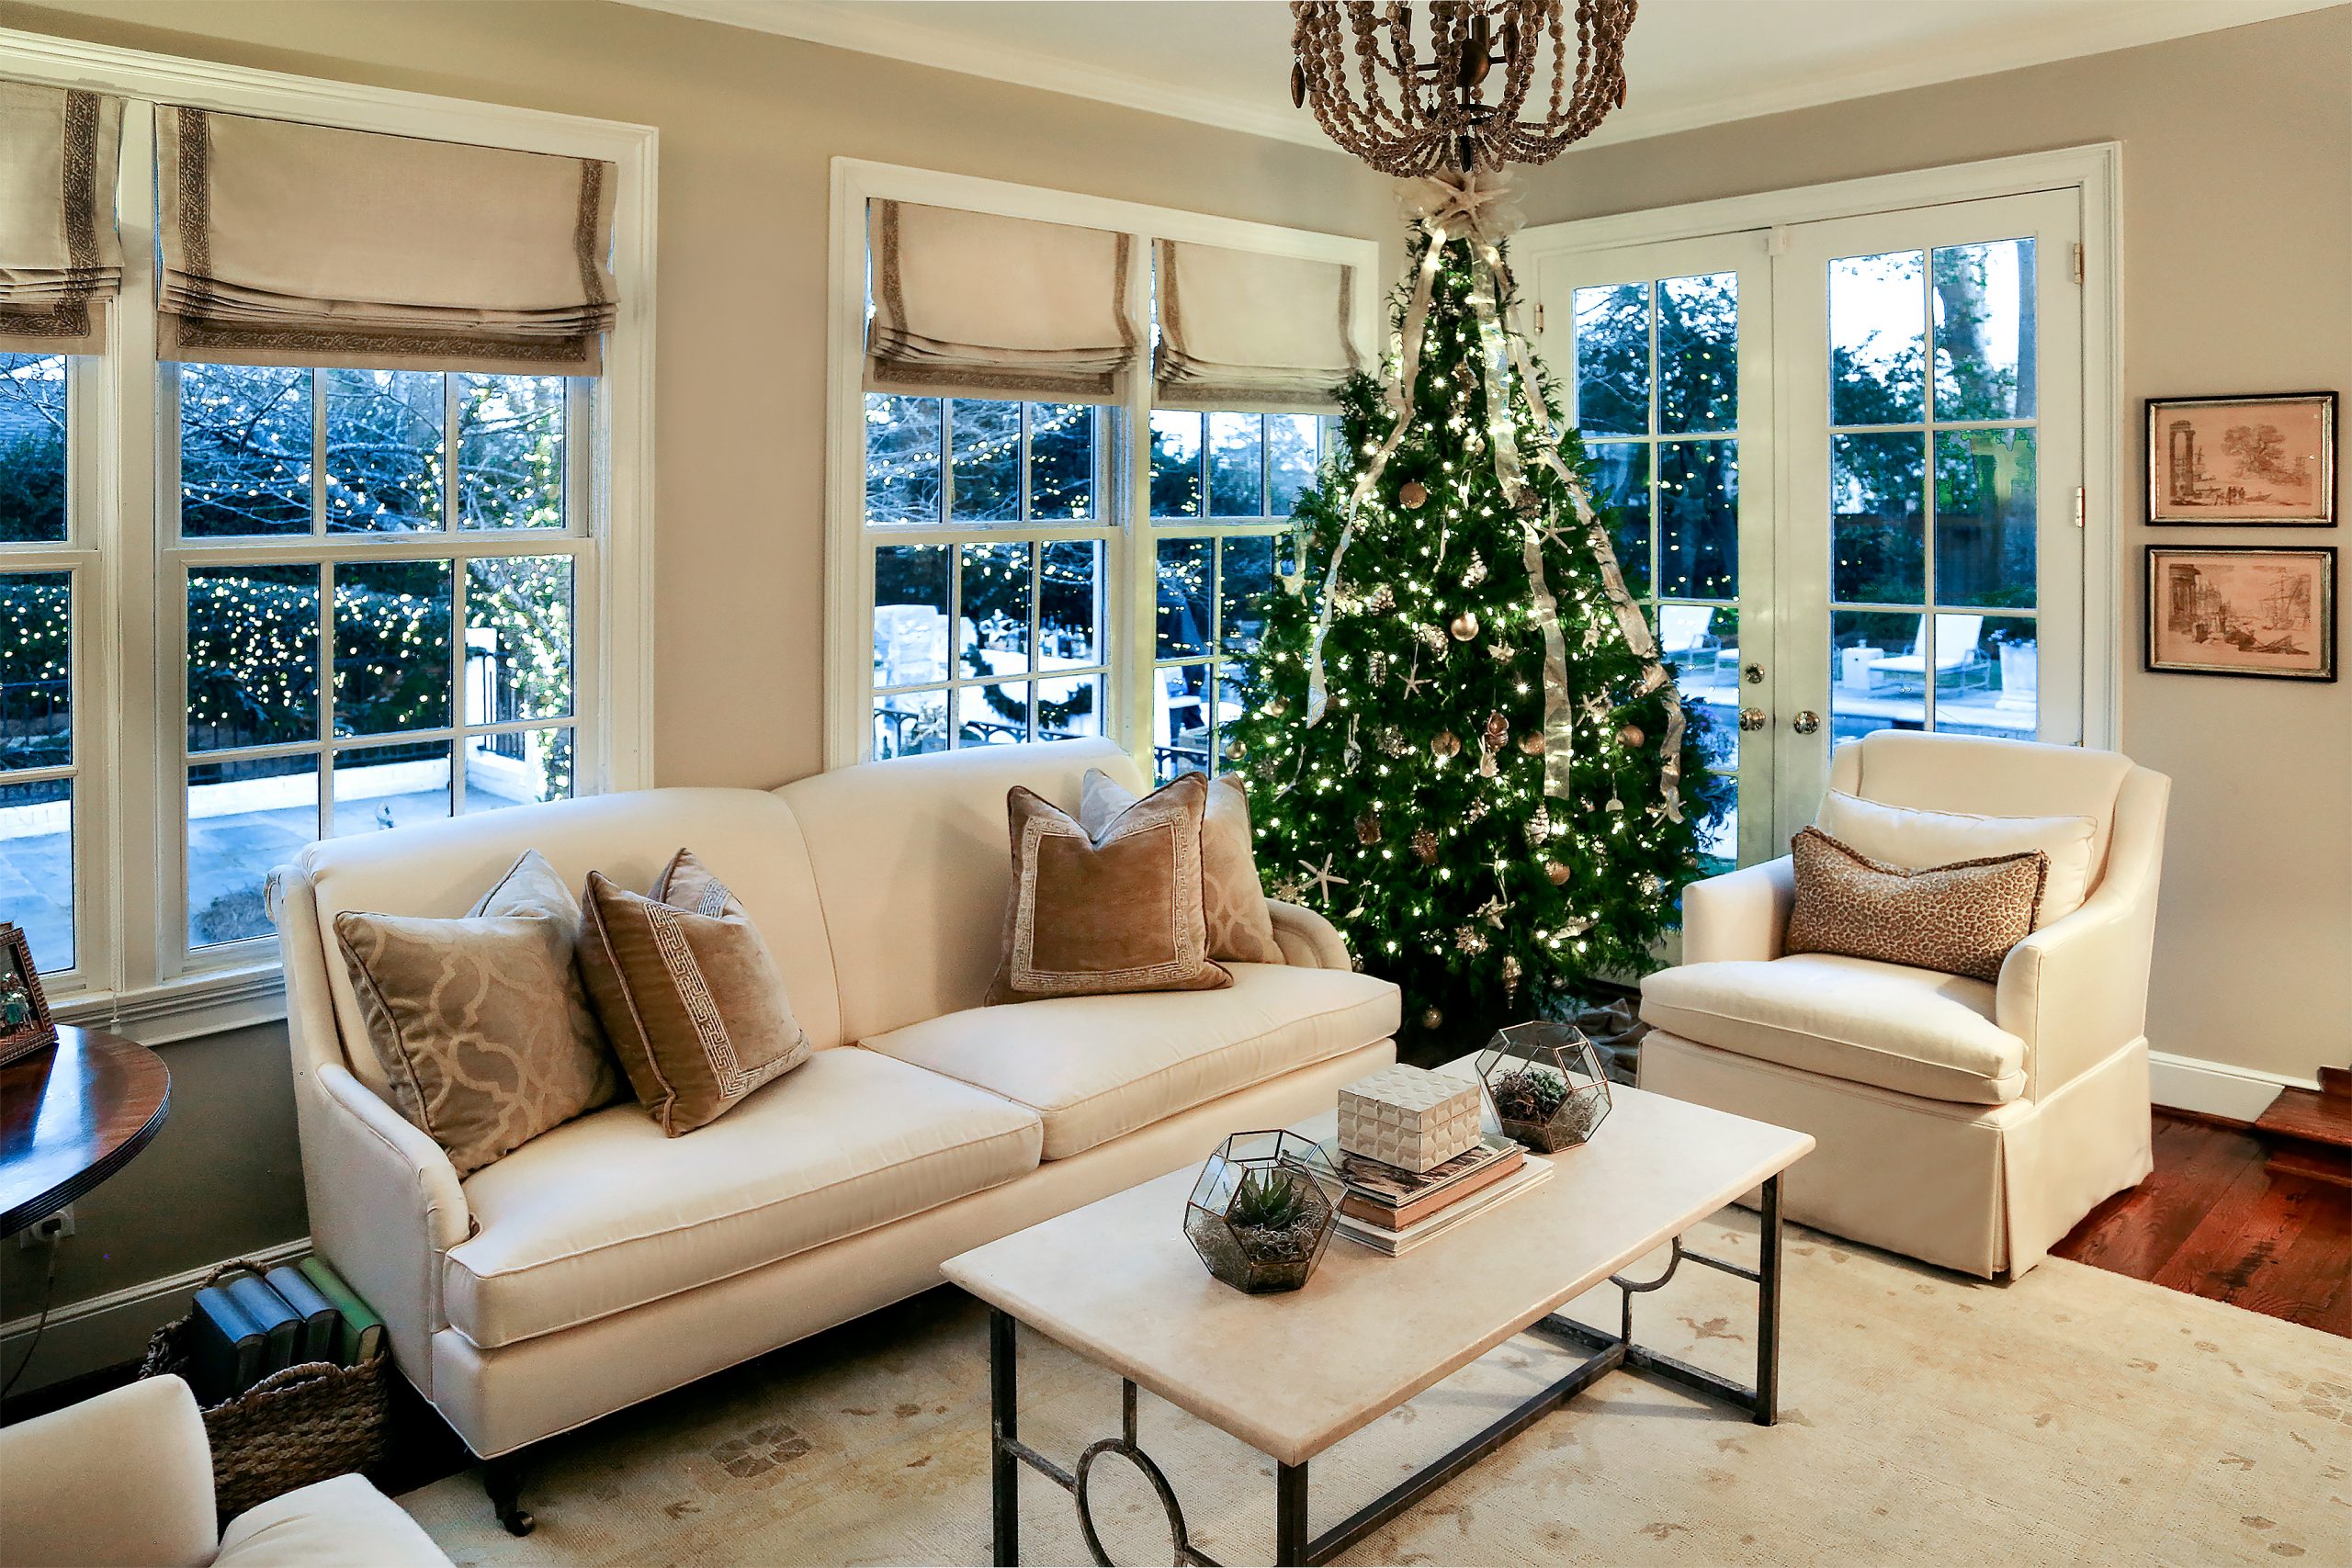 Originally from Mount Pleasant, Rebecca decorates the sunken sunroom with a coastal-themed tree decorated with sand dollars, starfish, and shells.